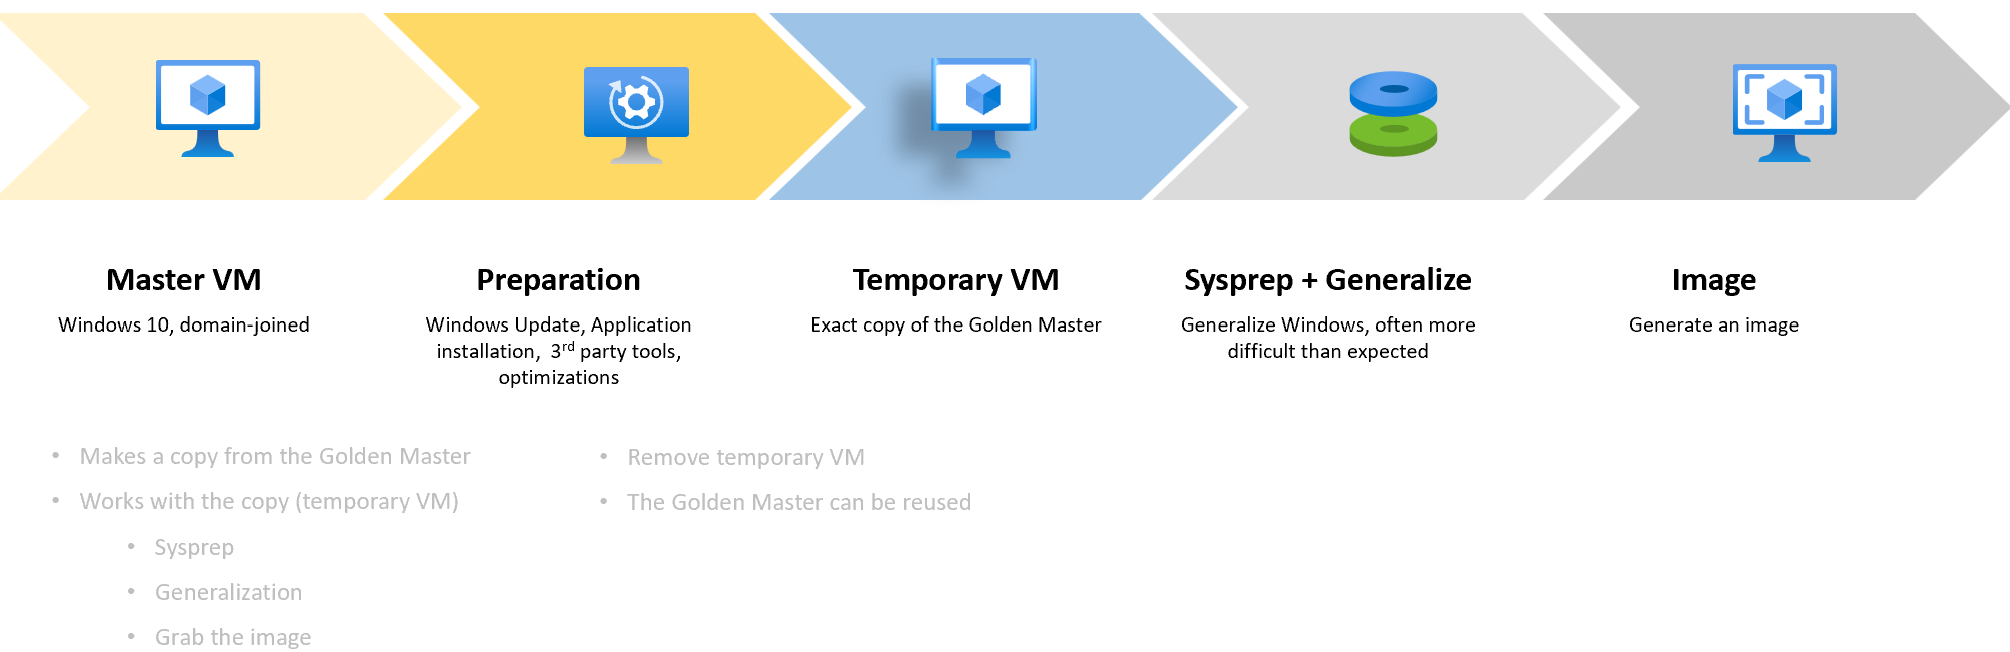 Sysprep and deploy Windows 11 22H2 in Azure with a custom image and a workaround